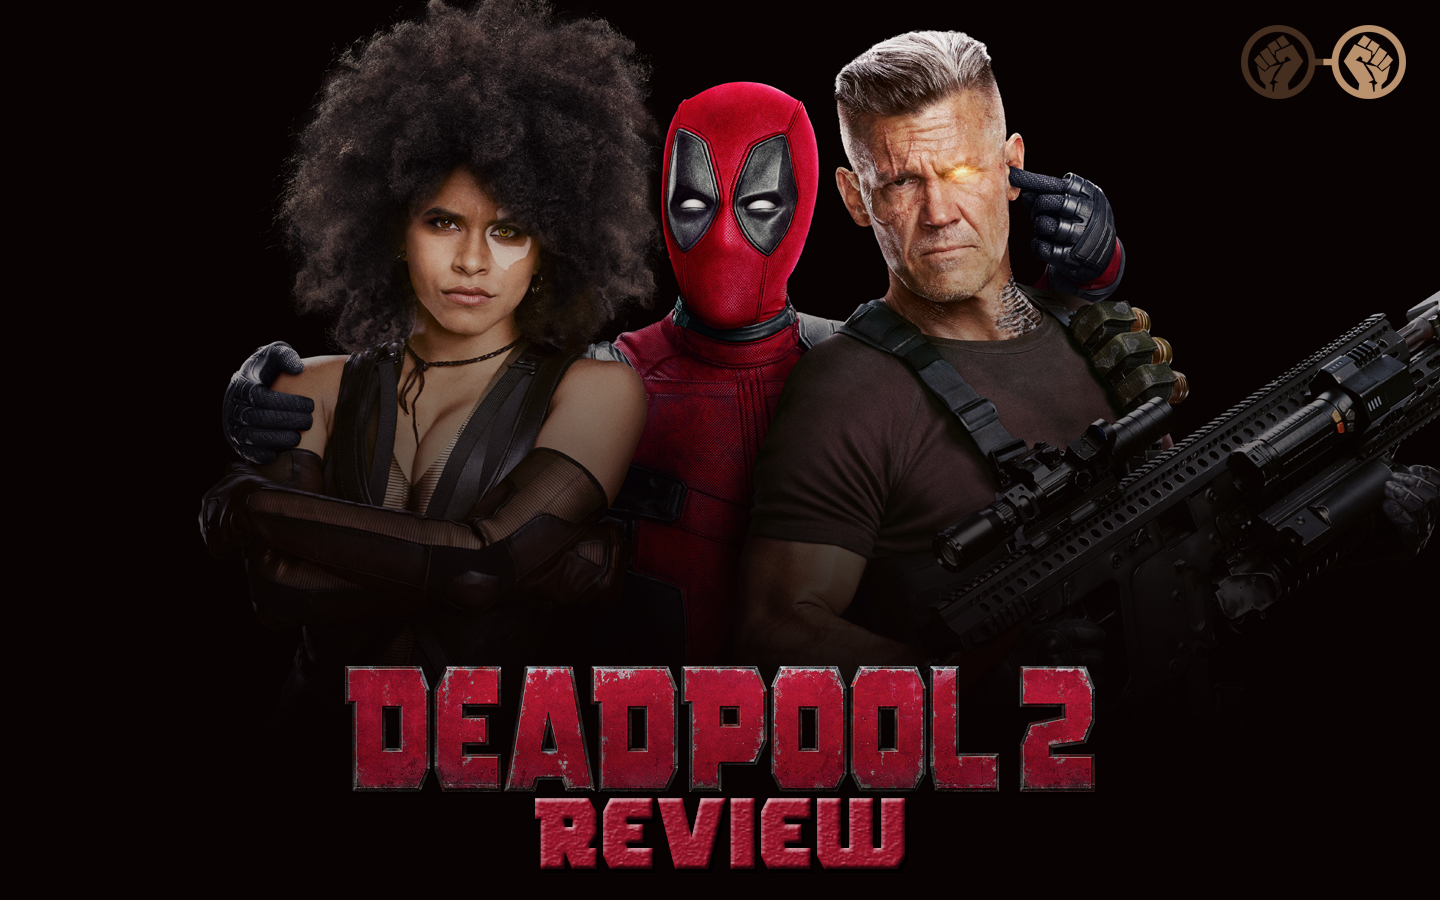 With Lots of Action, Laughs and Surprises, ‘Deadpool 2’ Is A Solid Sequel, Reminiscent of Its Beloved Predecessor (Spoiler-Free Review)